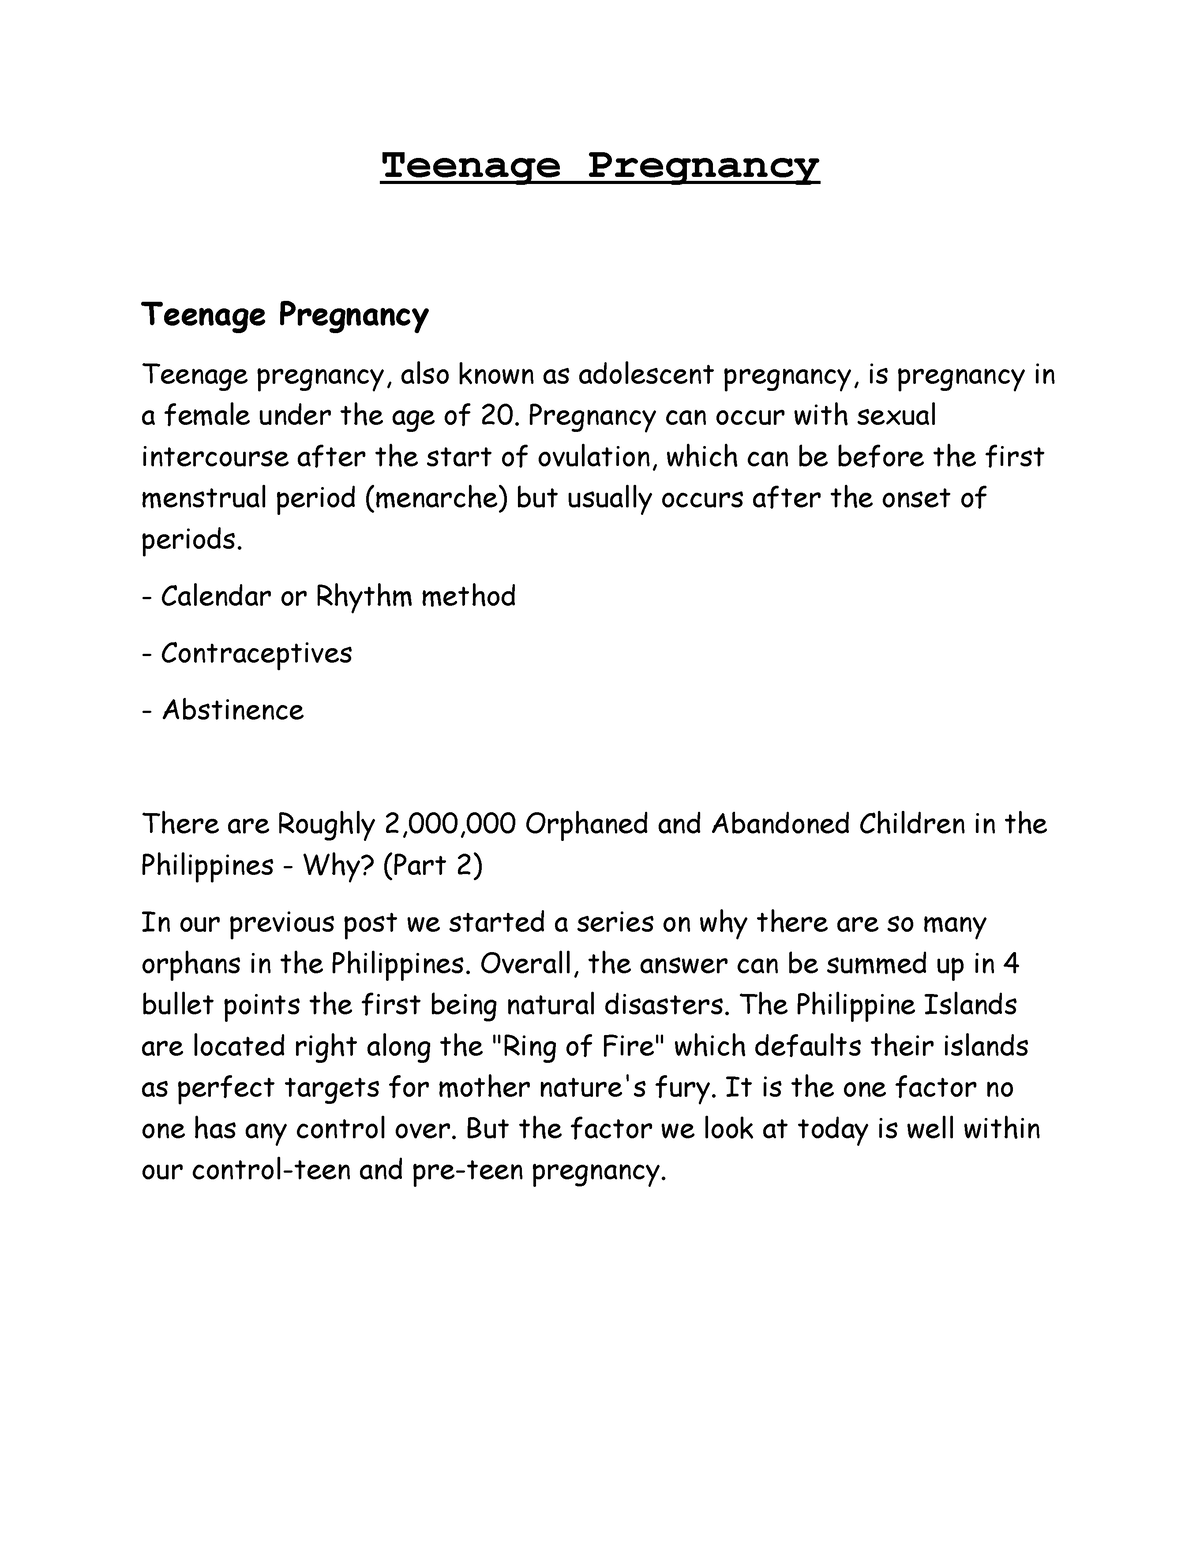 teenage pregnancy in the philippines essay